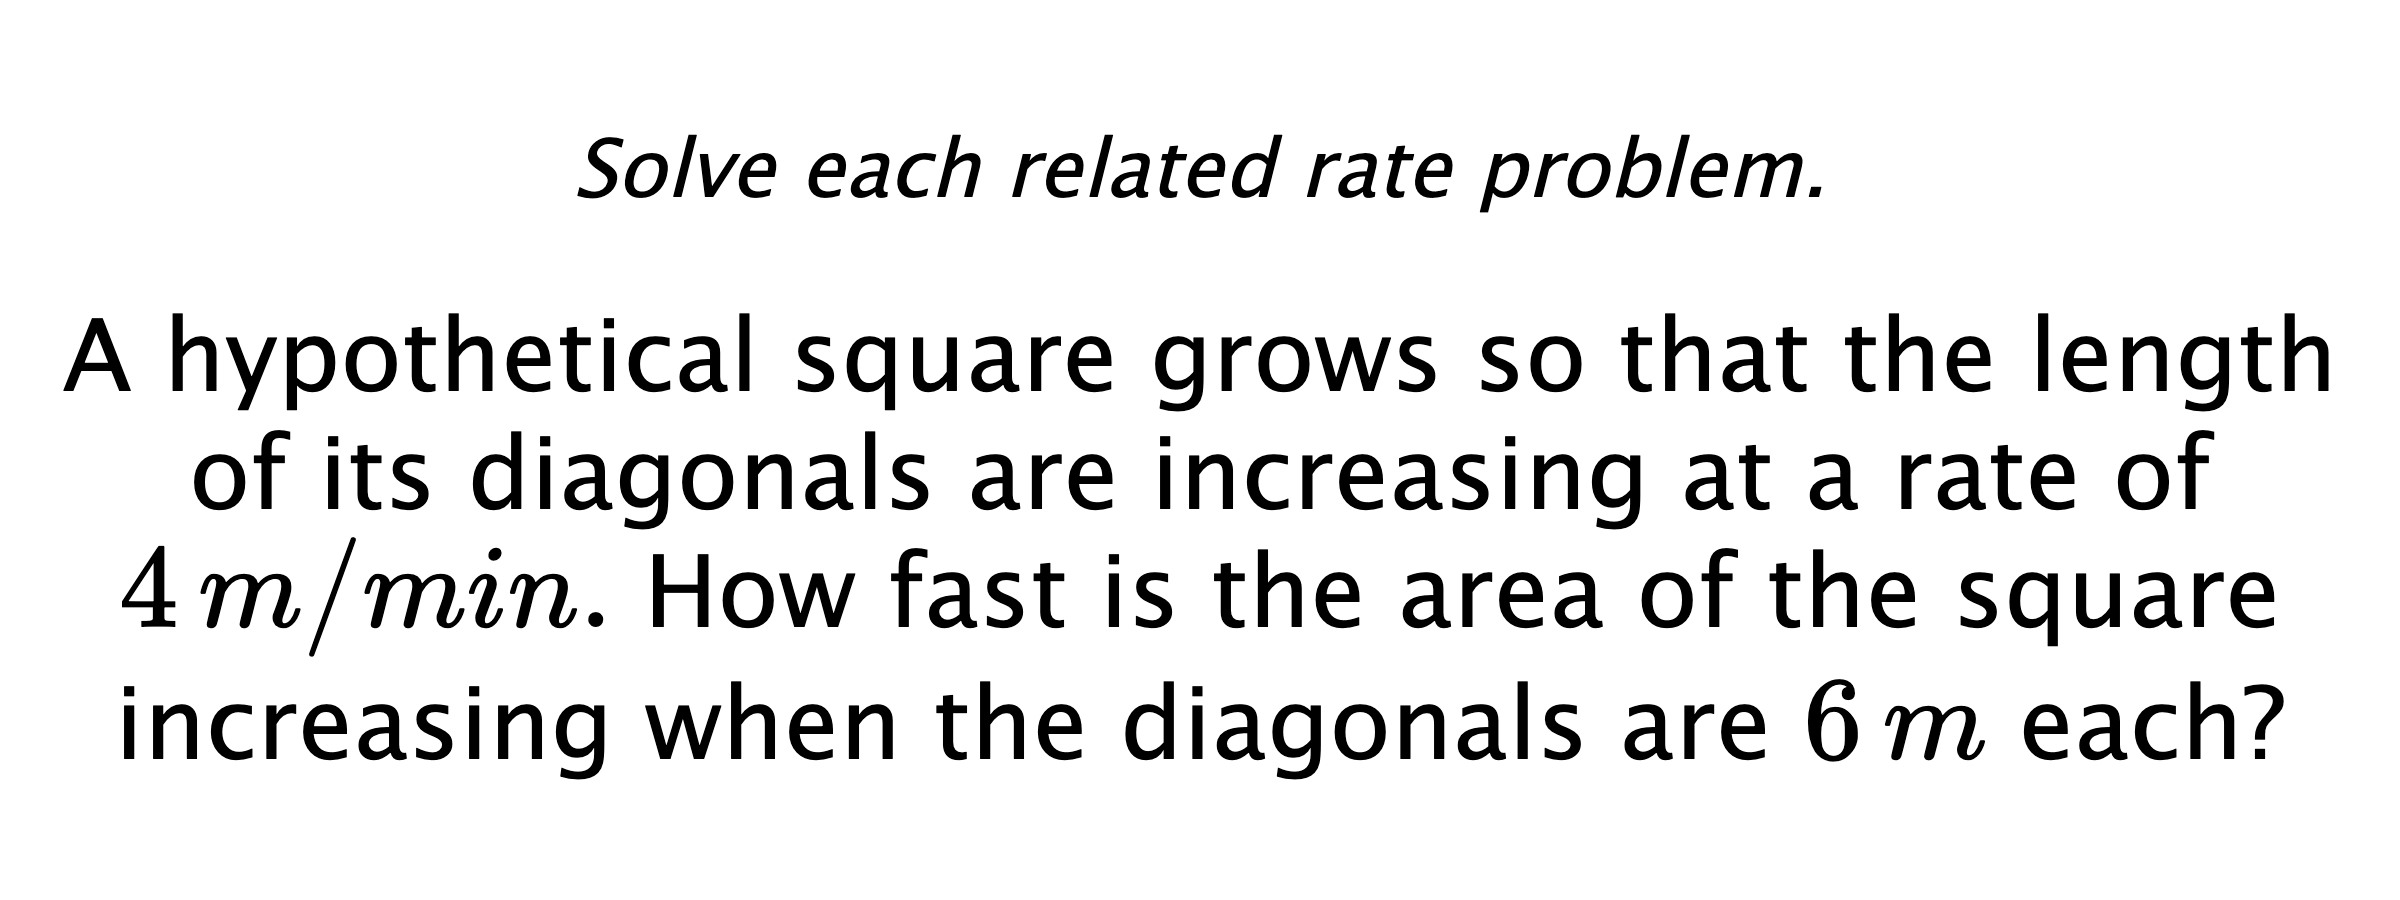 Solve each related rate problem. A hypothetical square grows so that the length of its diagonals are increasing at a rate of $4\,m/min.$ How fast is the area of the square increasing when the diagonals are $6\,m$ each?